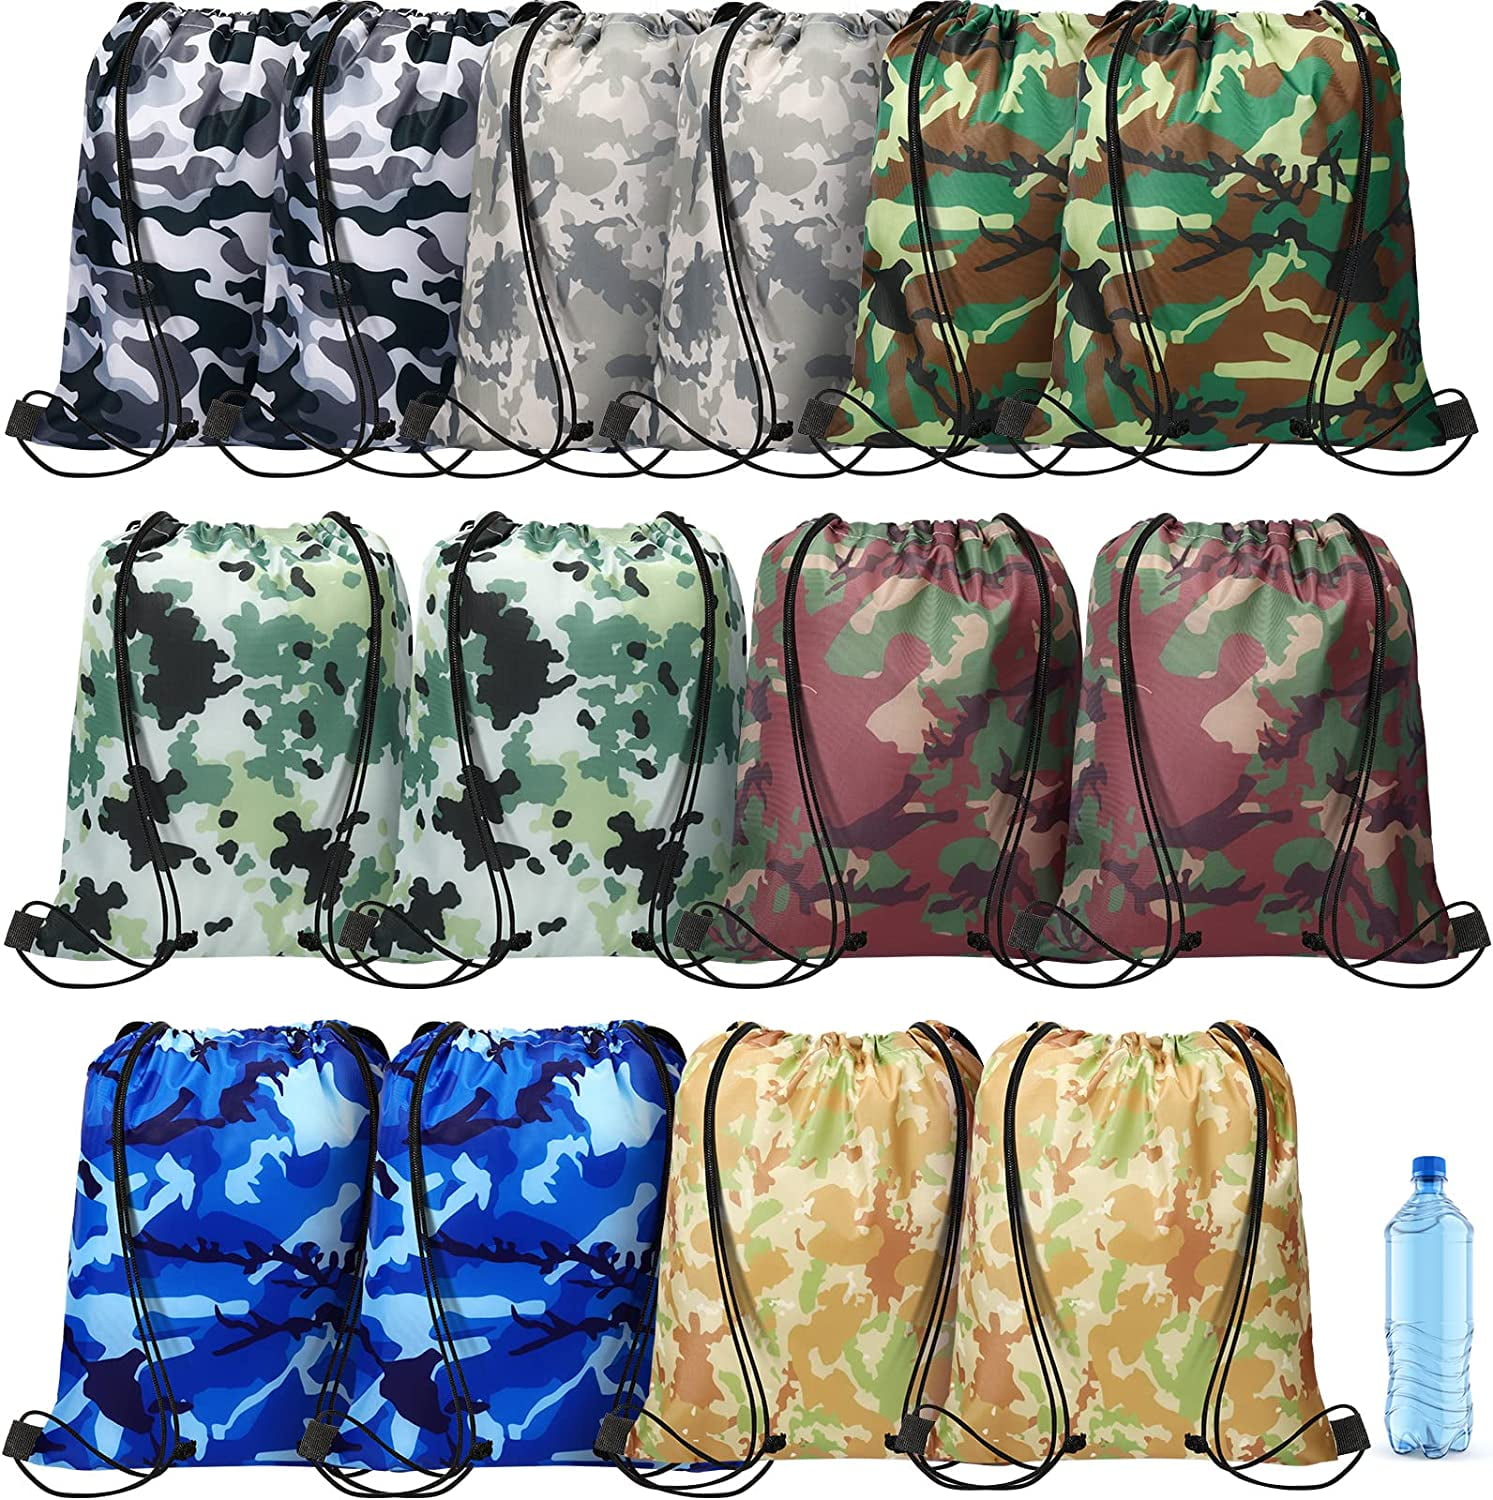  15 PCS Tie Dye Drawstring Party Favor Bags,Small Drawstring  Backpack,Camouflage Treat Bag Fabric Drawstring Bag,Tie Dye Birthday Gift  Bags Colorful Party Goodie Bags for Kids Birthday Party Supplies : Toys 